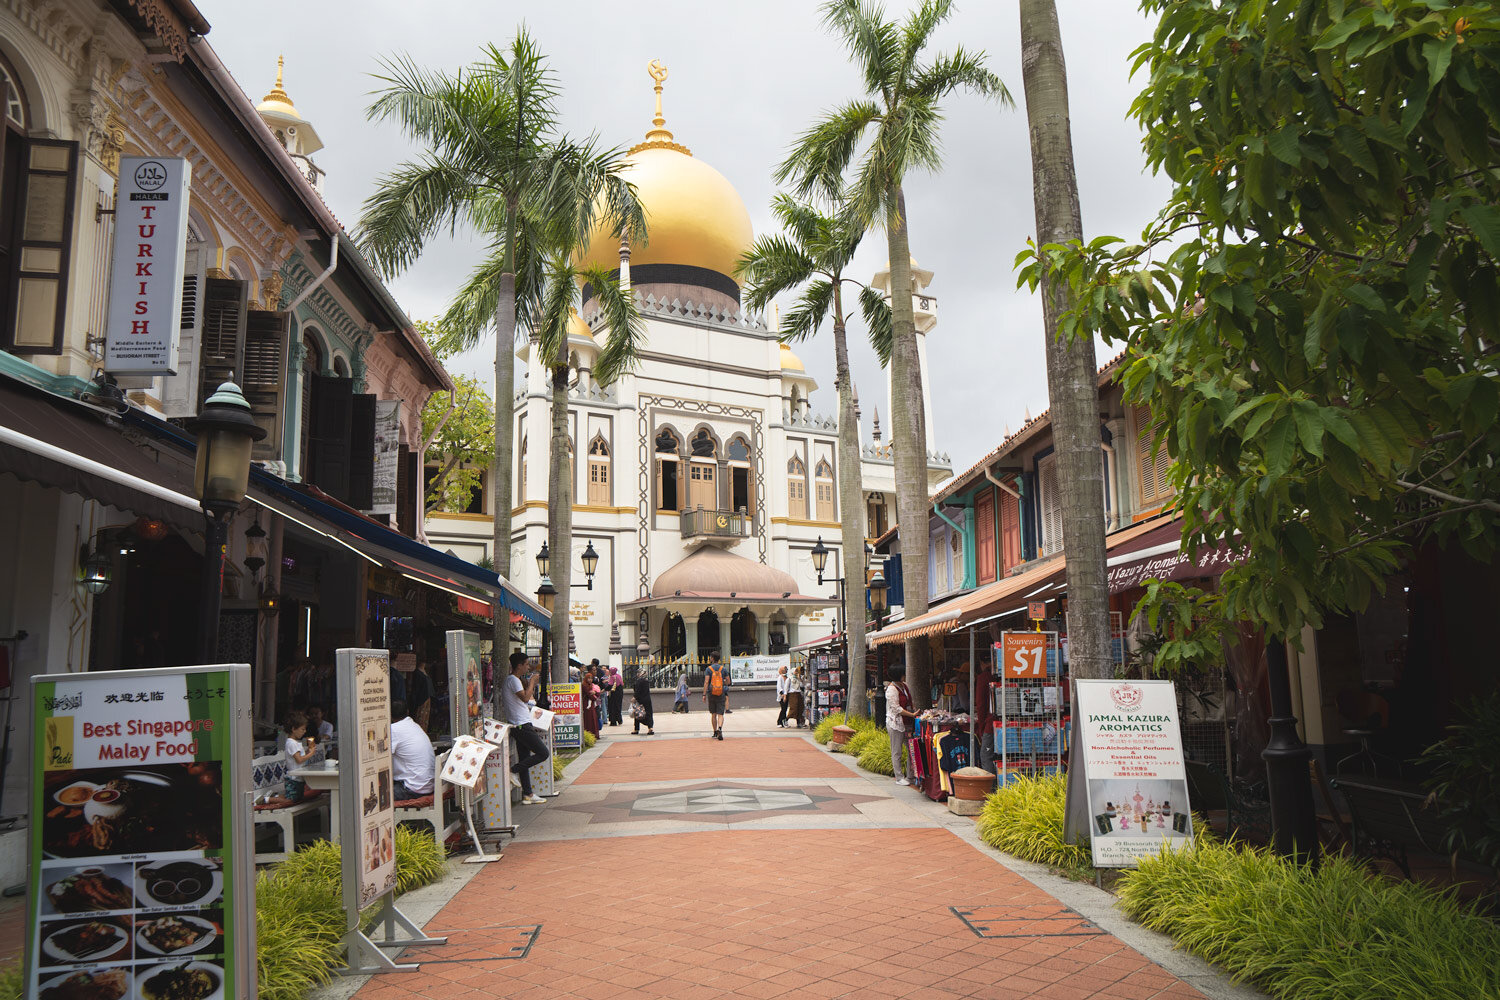 The Arab Street with the Sultan Mosque.